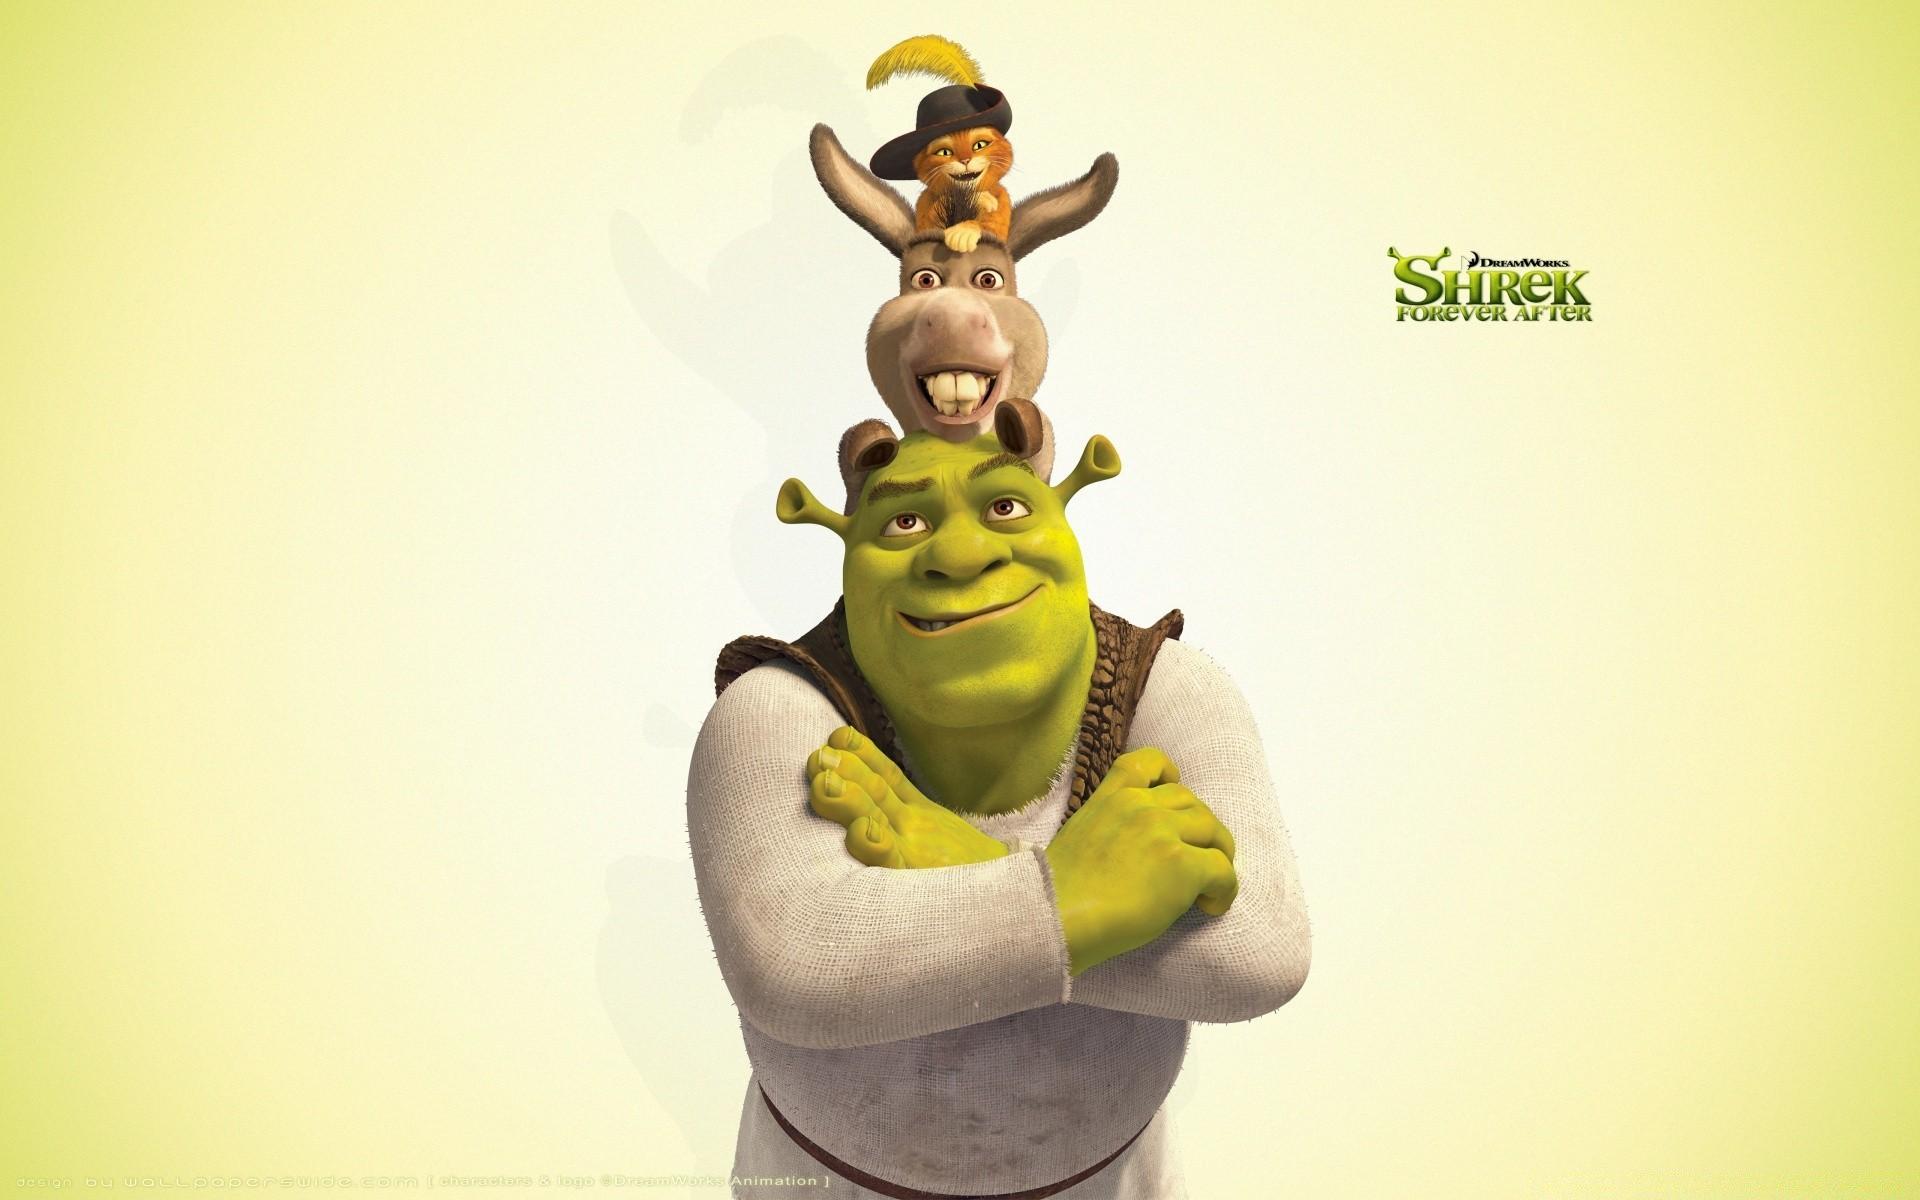 Shrek, Donkey and Puss in Boots, Shrek The Final Chapter